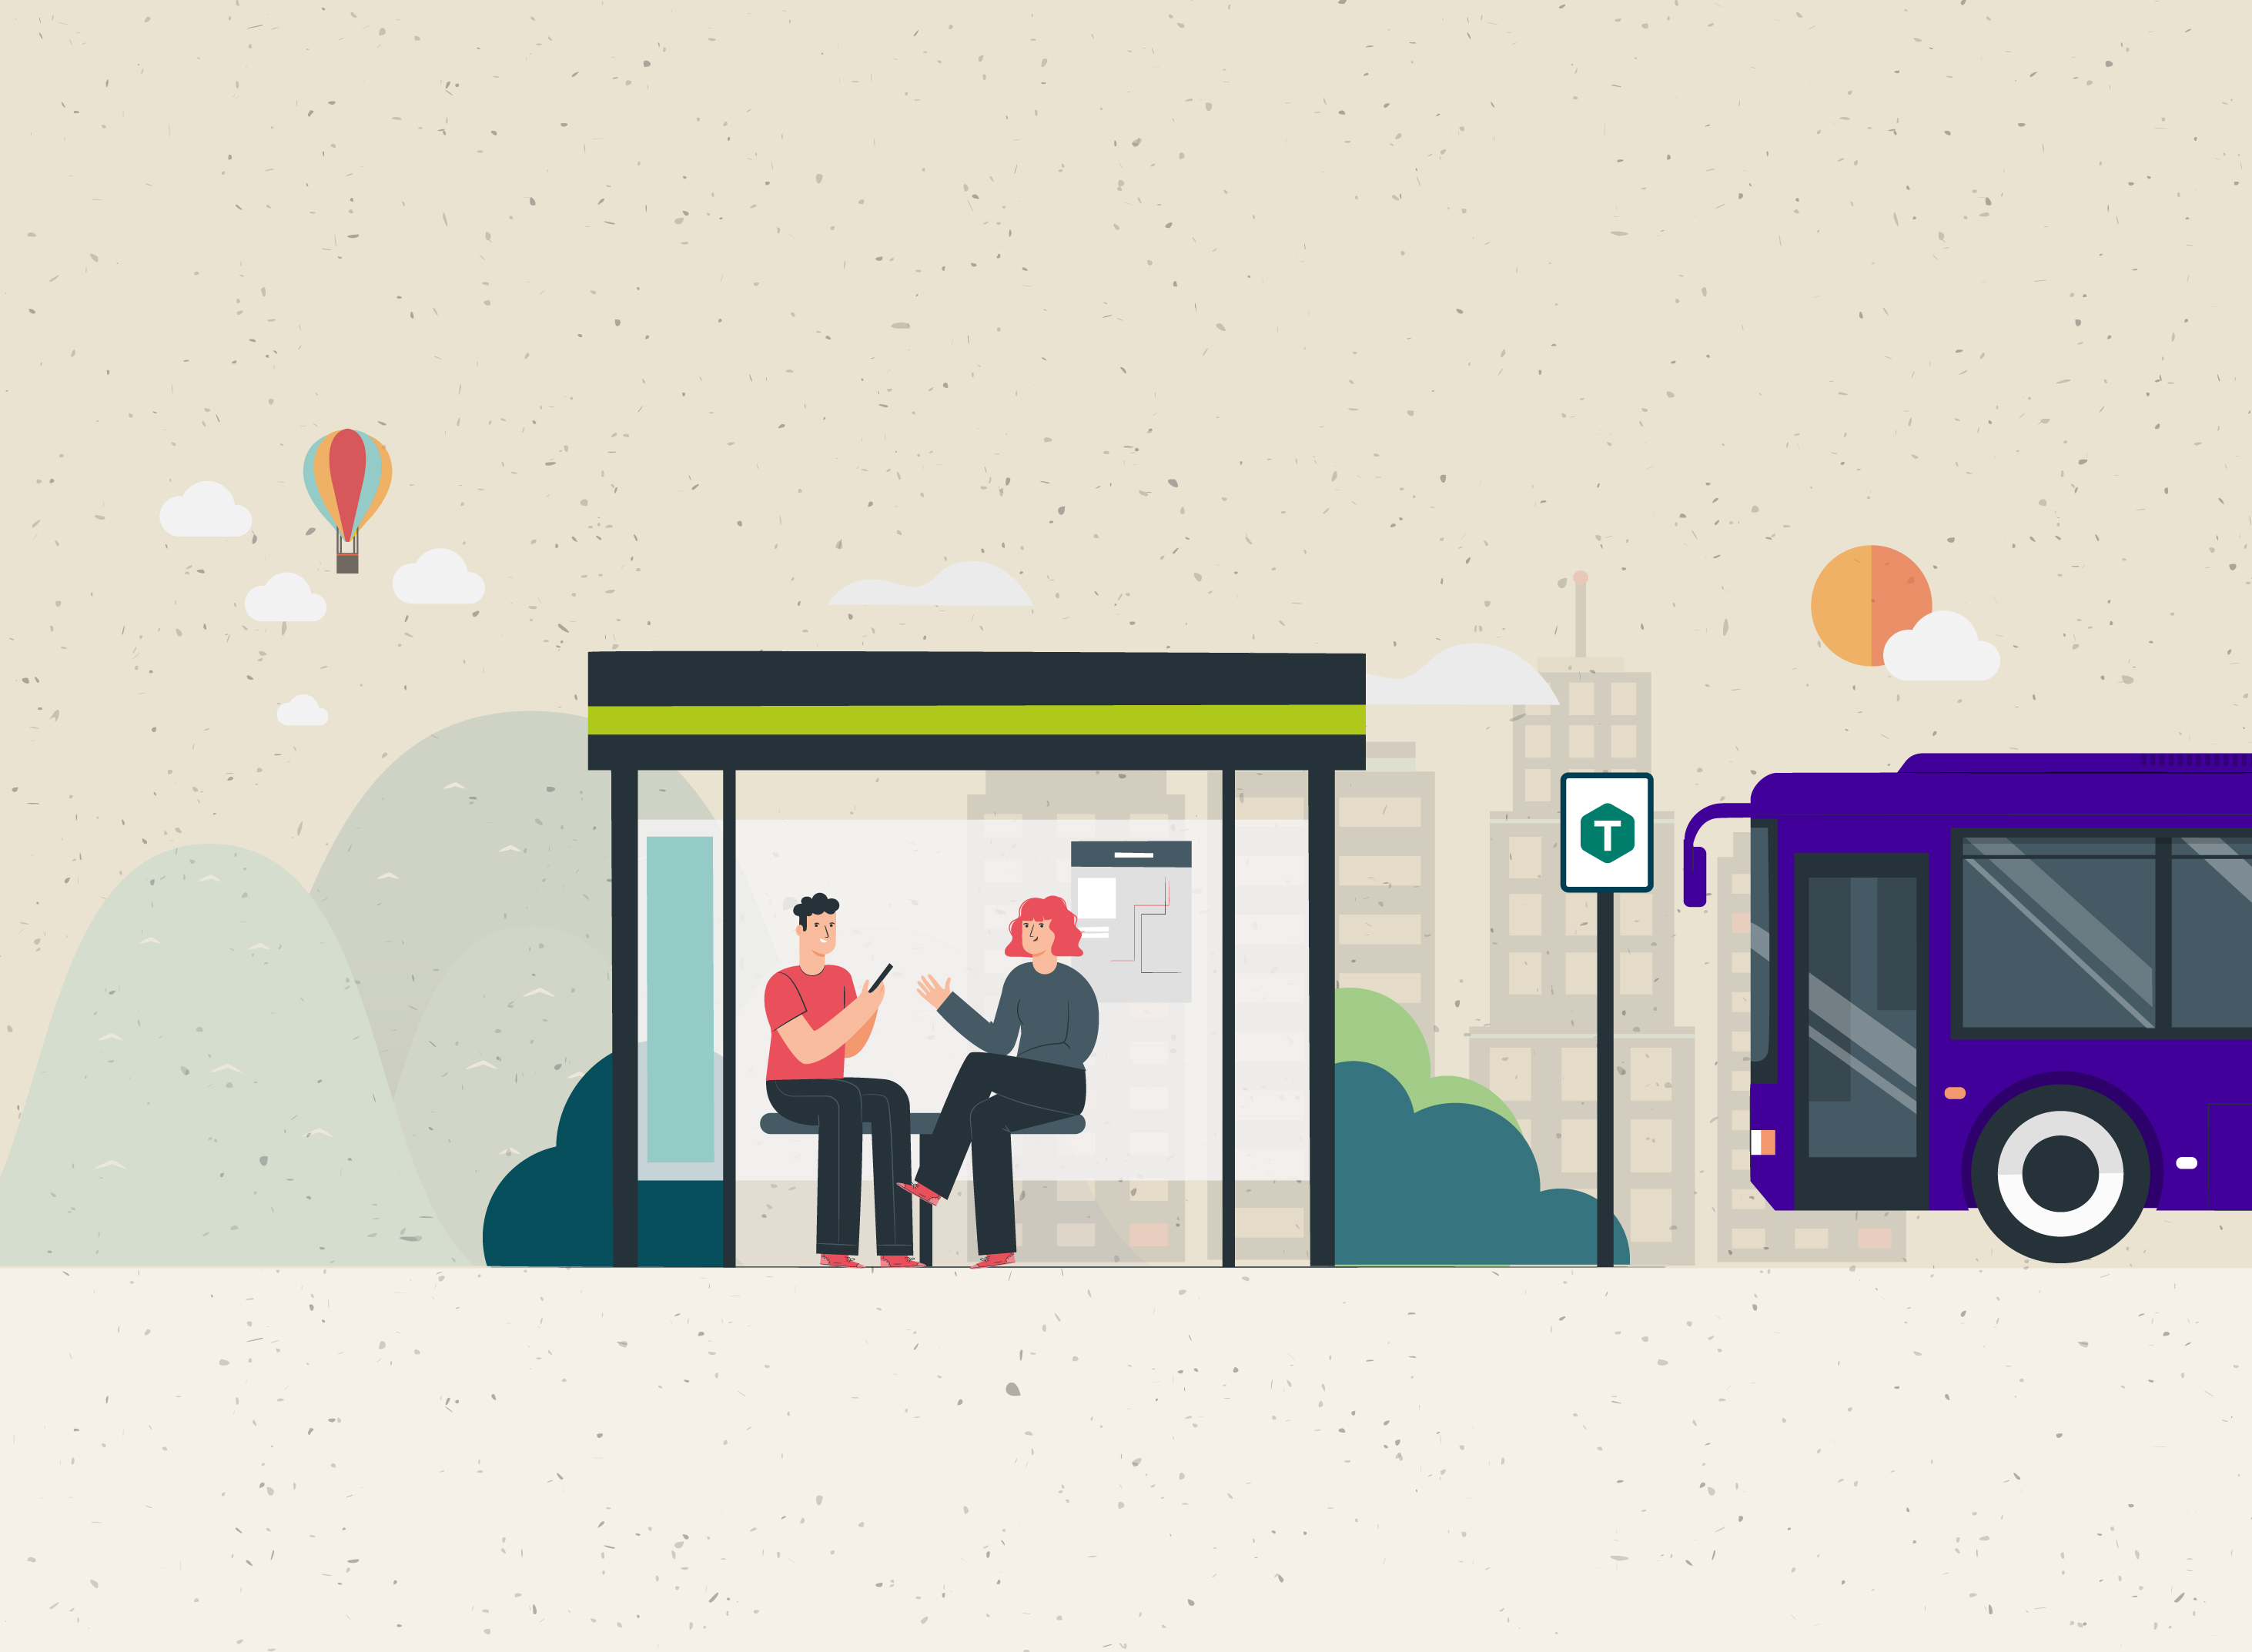 Graphic design showing two people at a bus stop